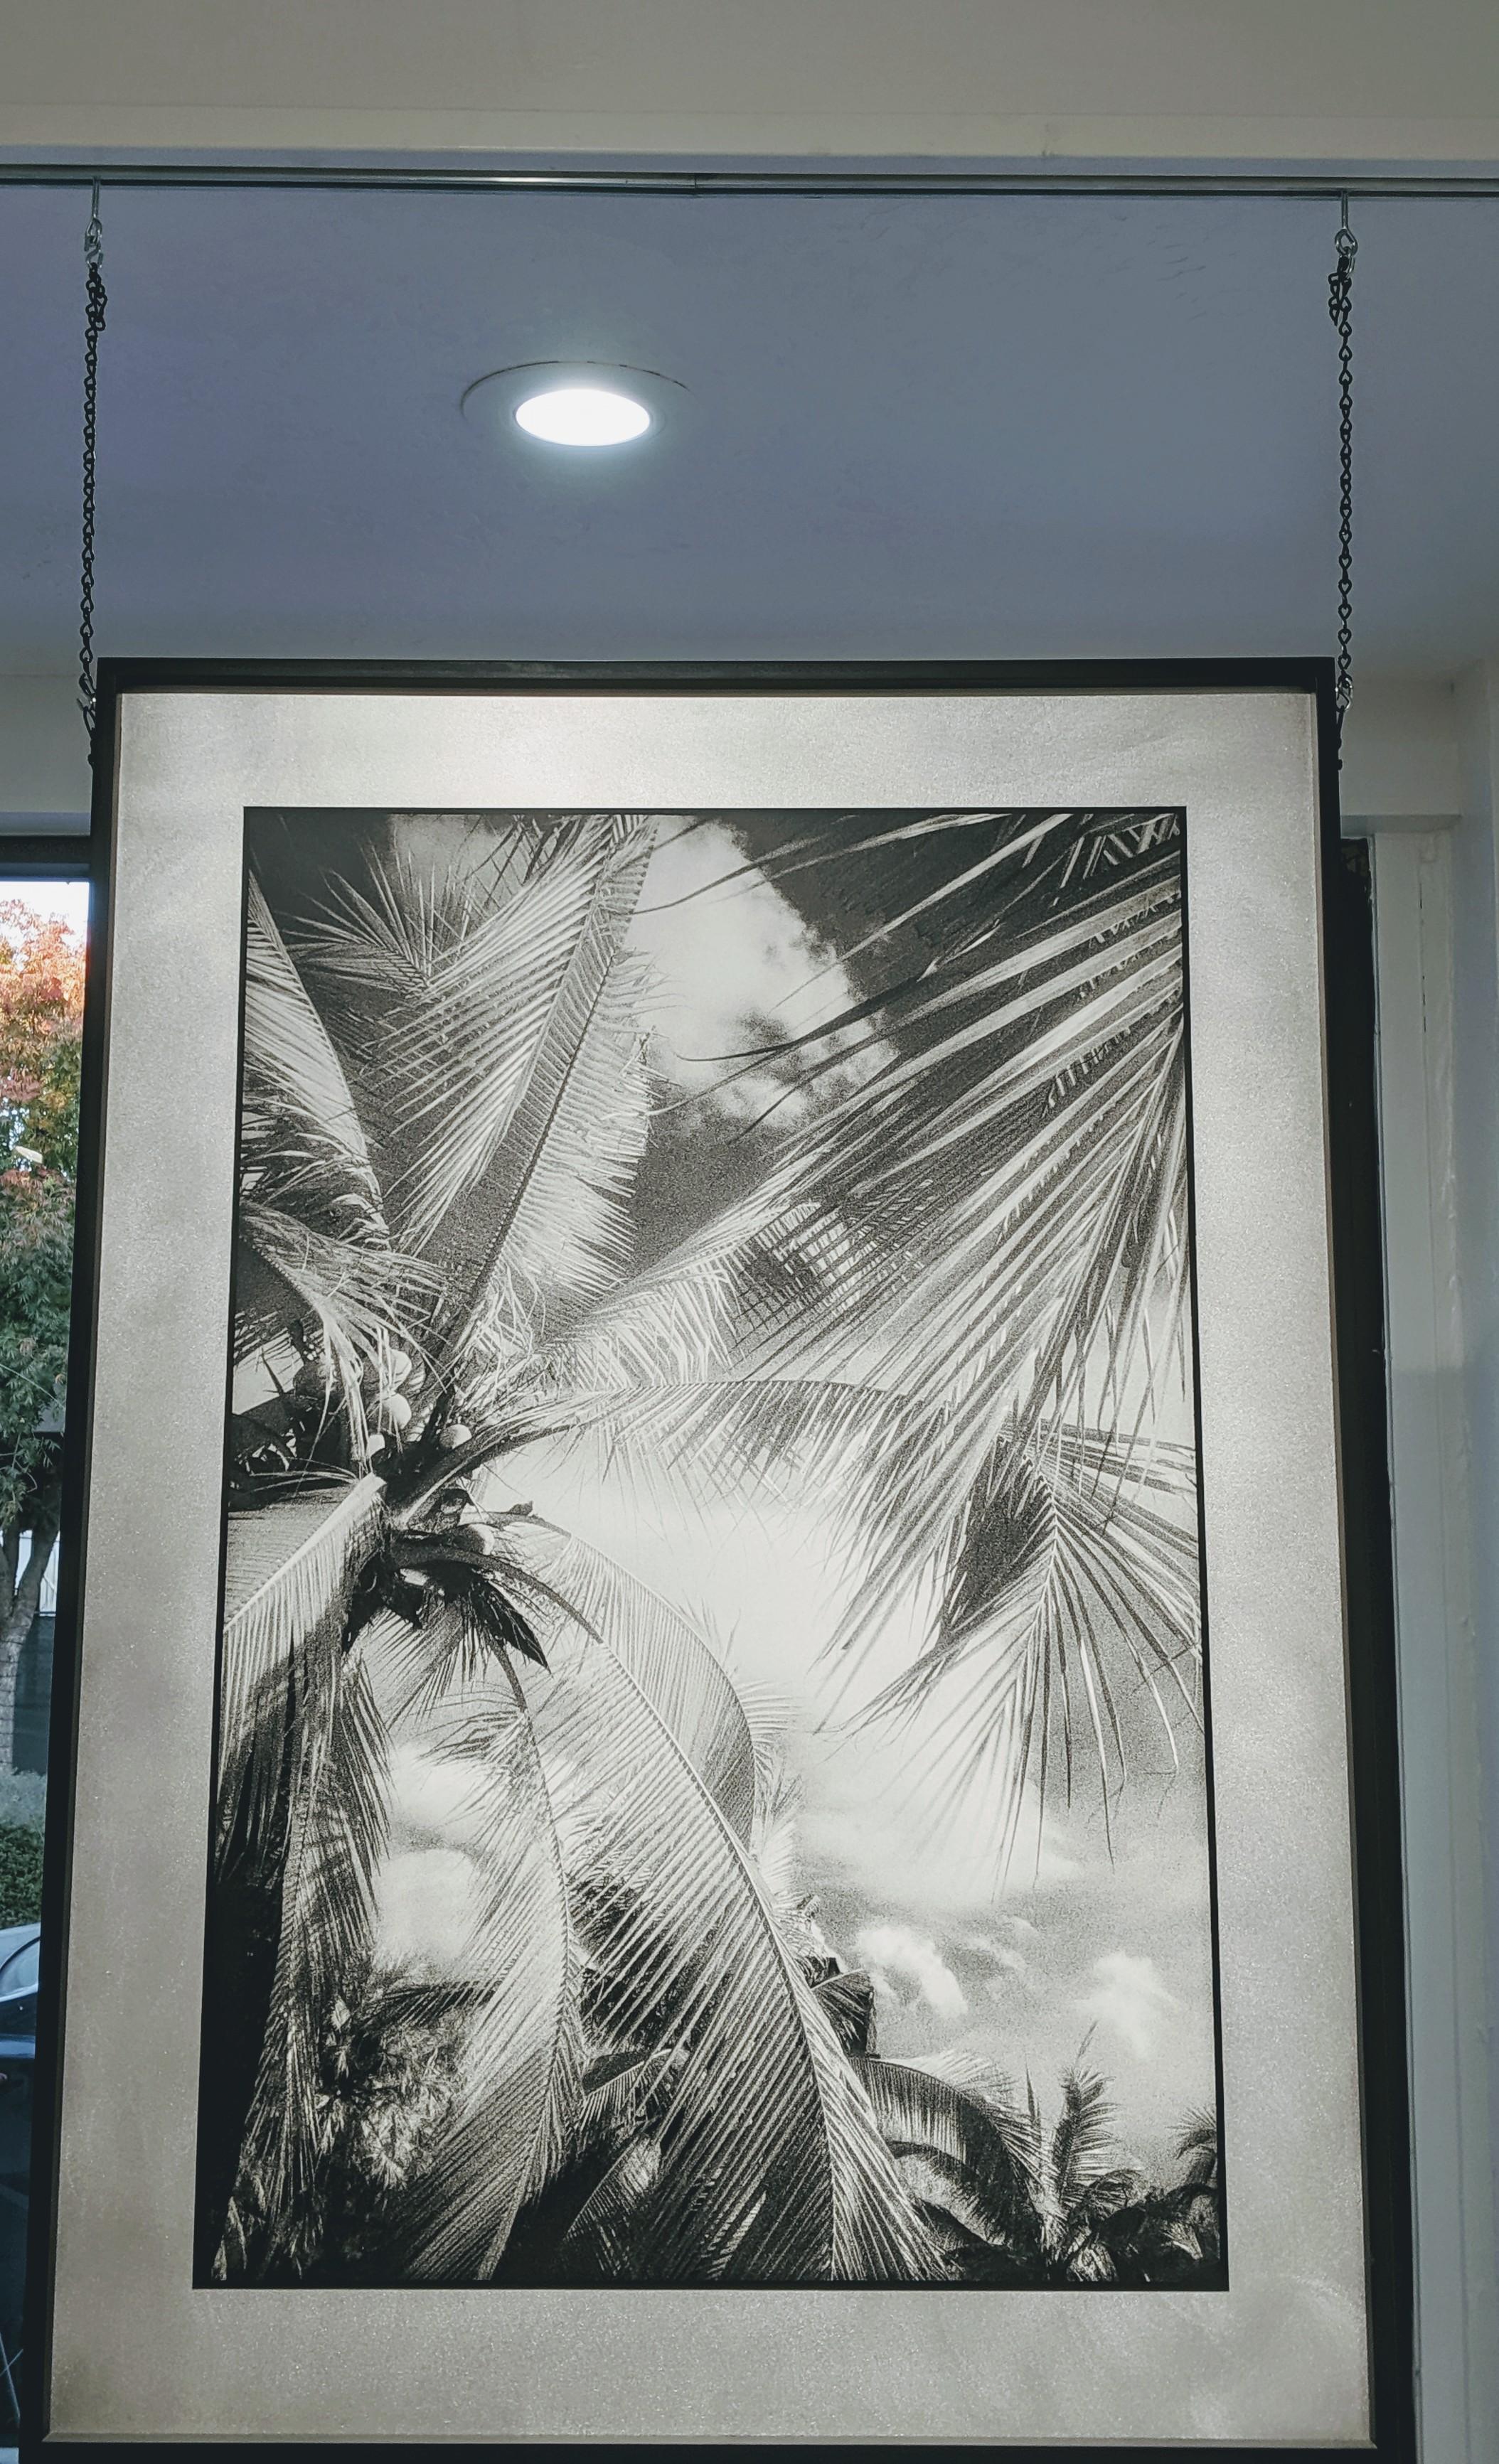 This is a double sided work, that hangs from the sides of the frame.  Alfano has mounted the negative and positive image of 